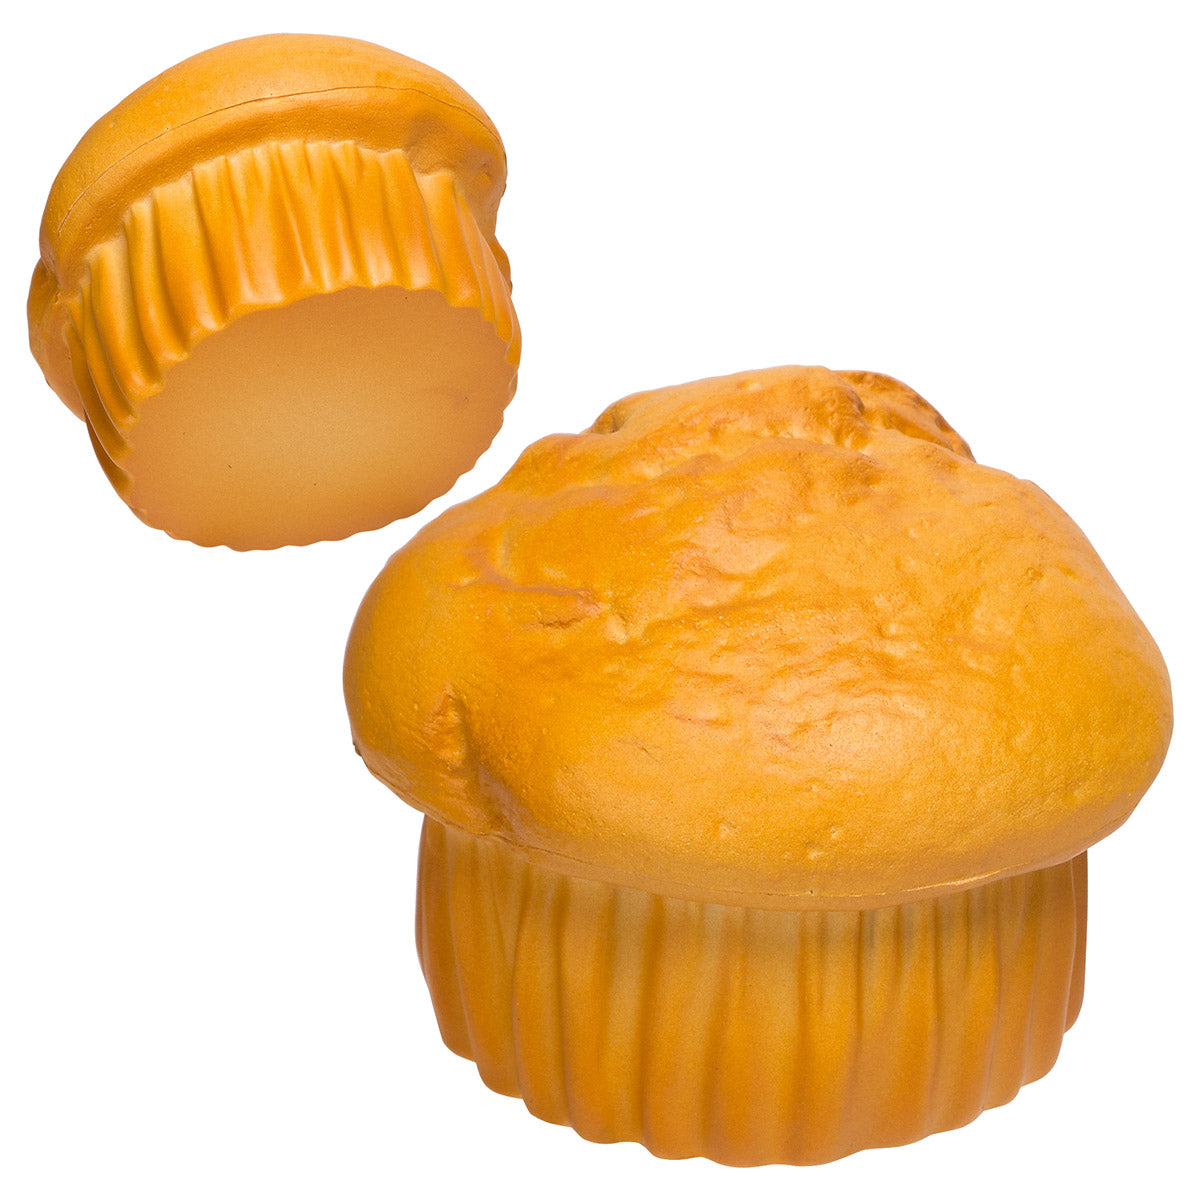  Muffin Stress Reliever - Undecorated - General Product Image